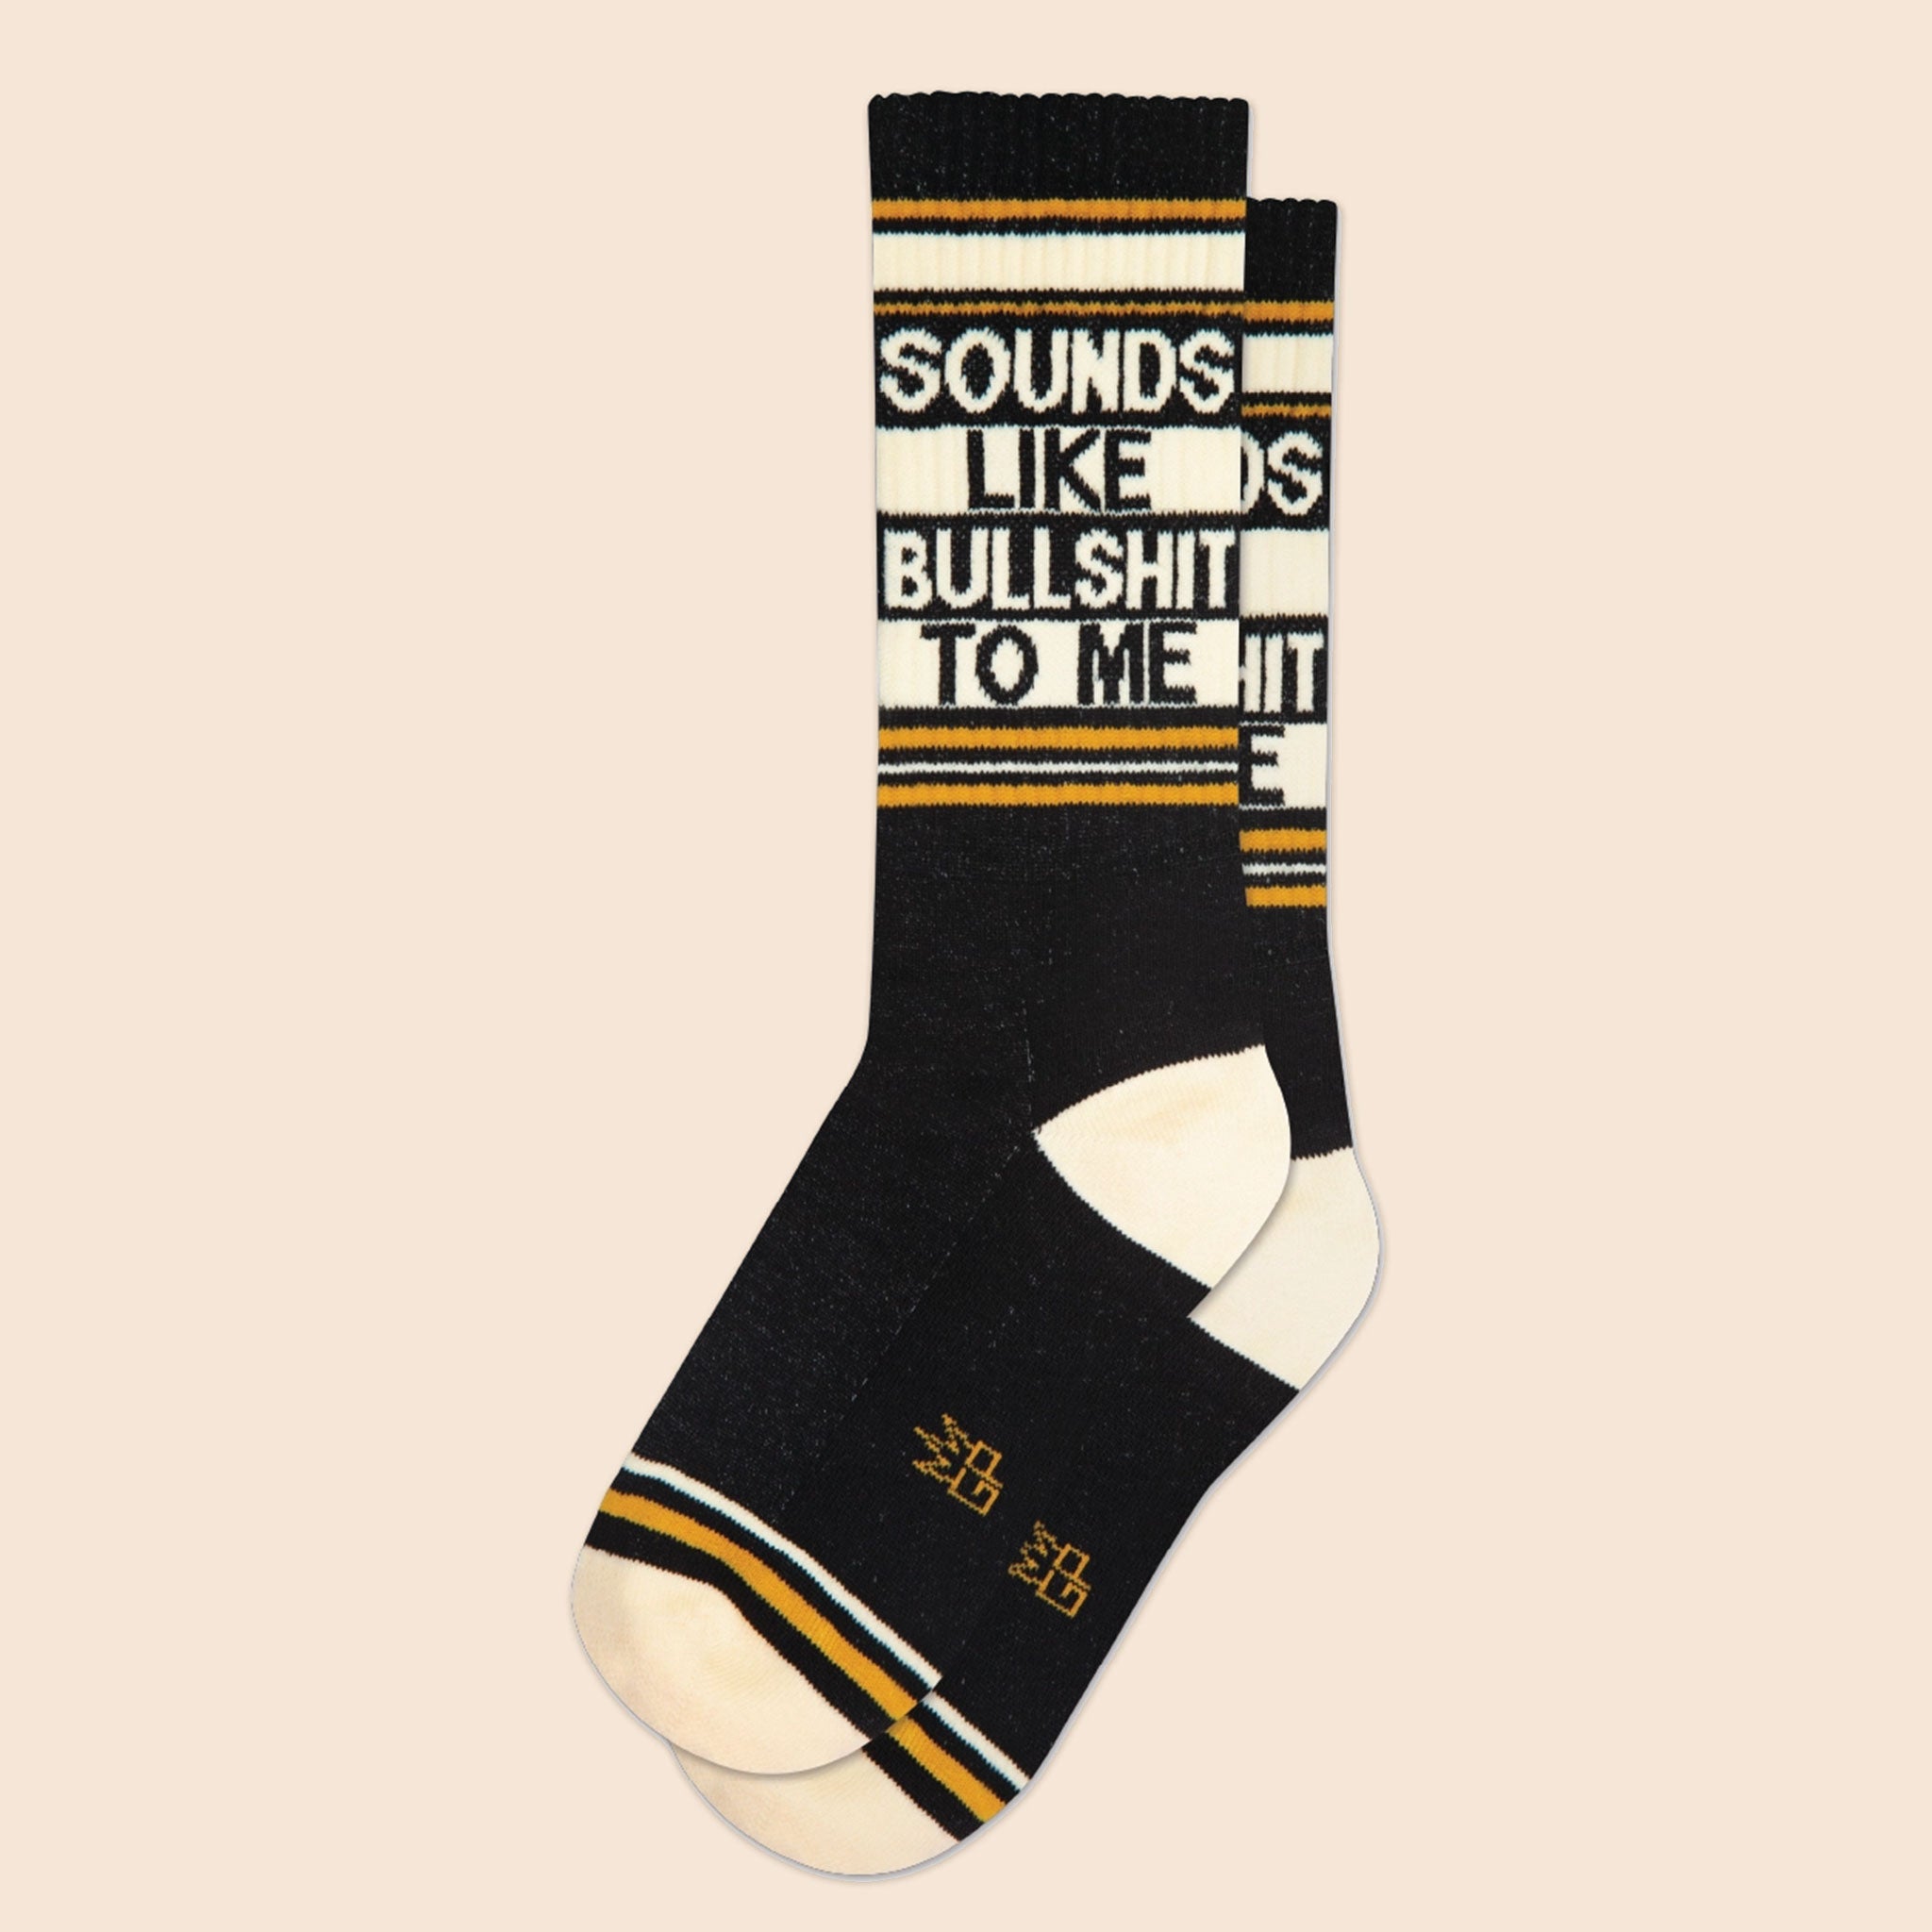 On a neutral background is a pair of black socks with yellow and white details along with text that reads, "Sounds Like Bullshit To Me".